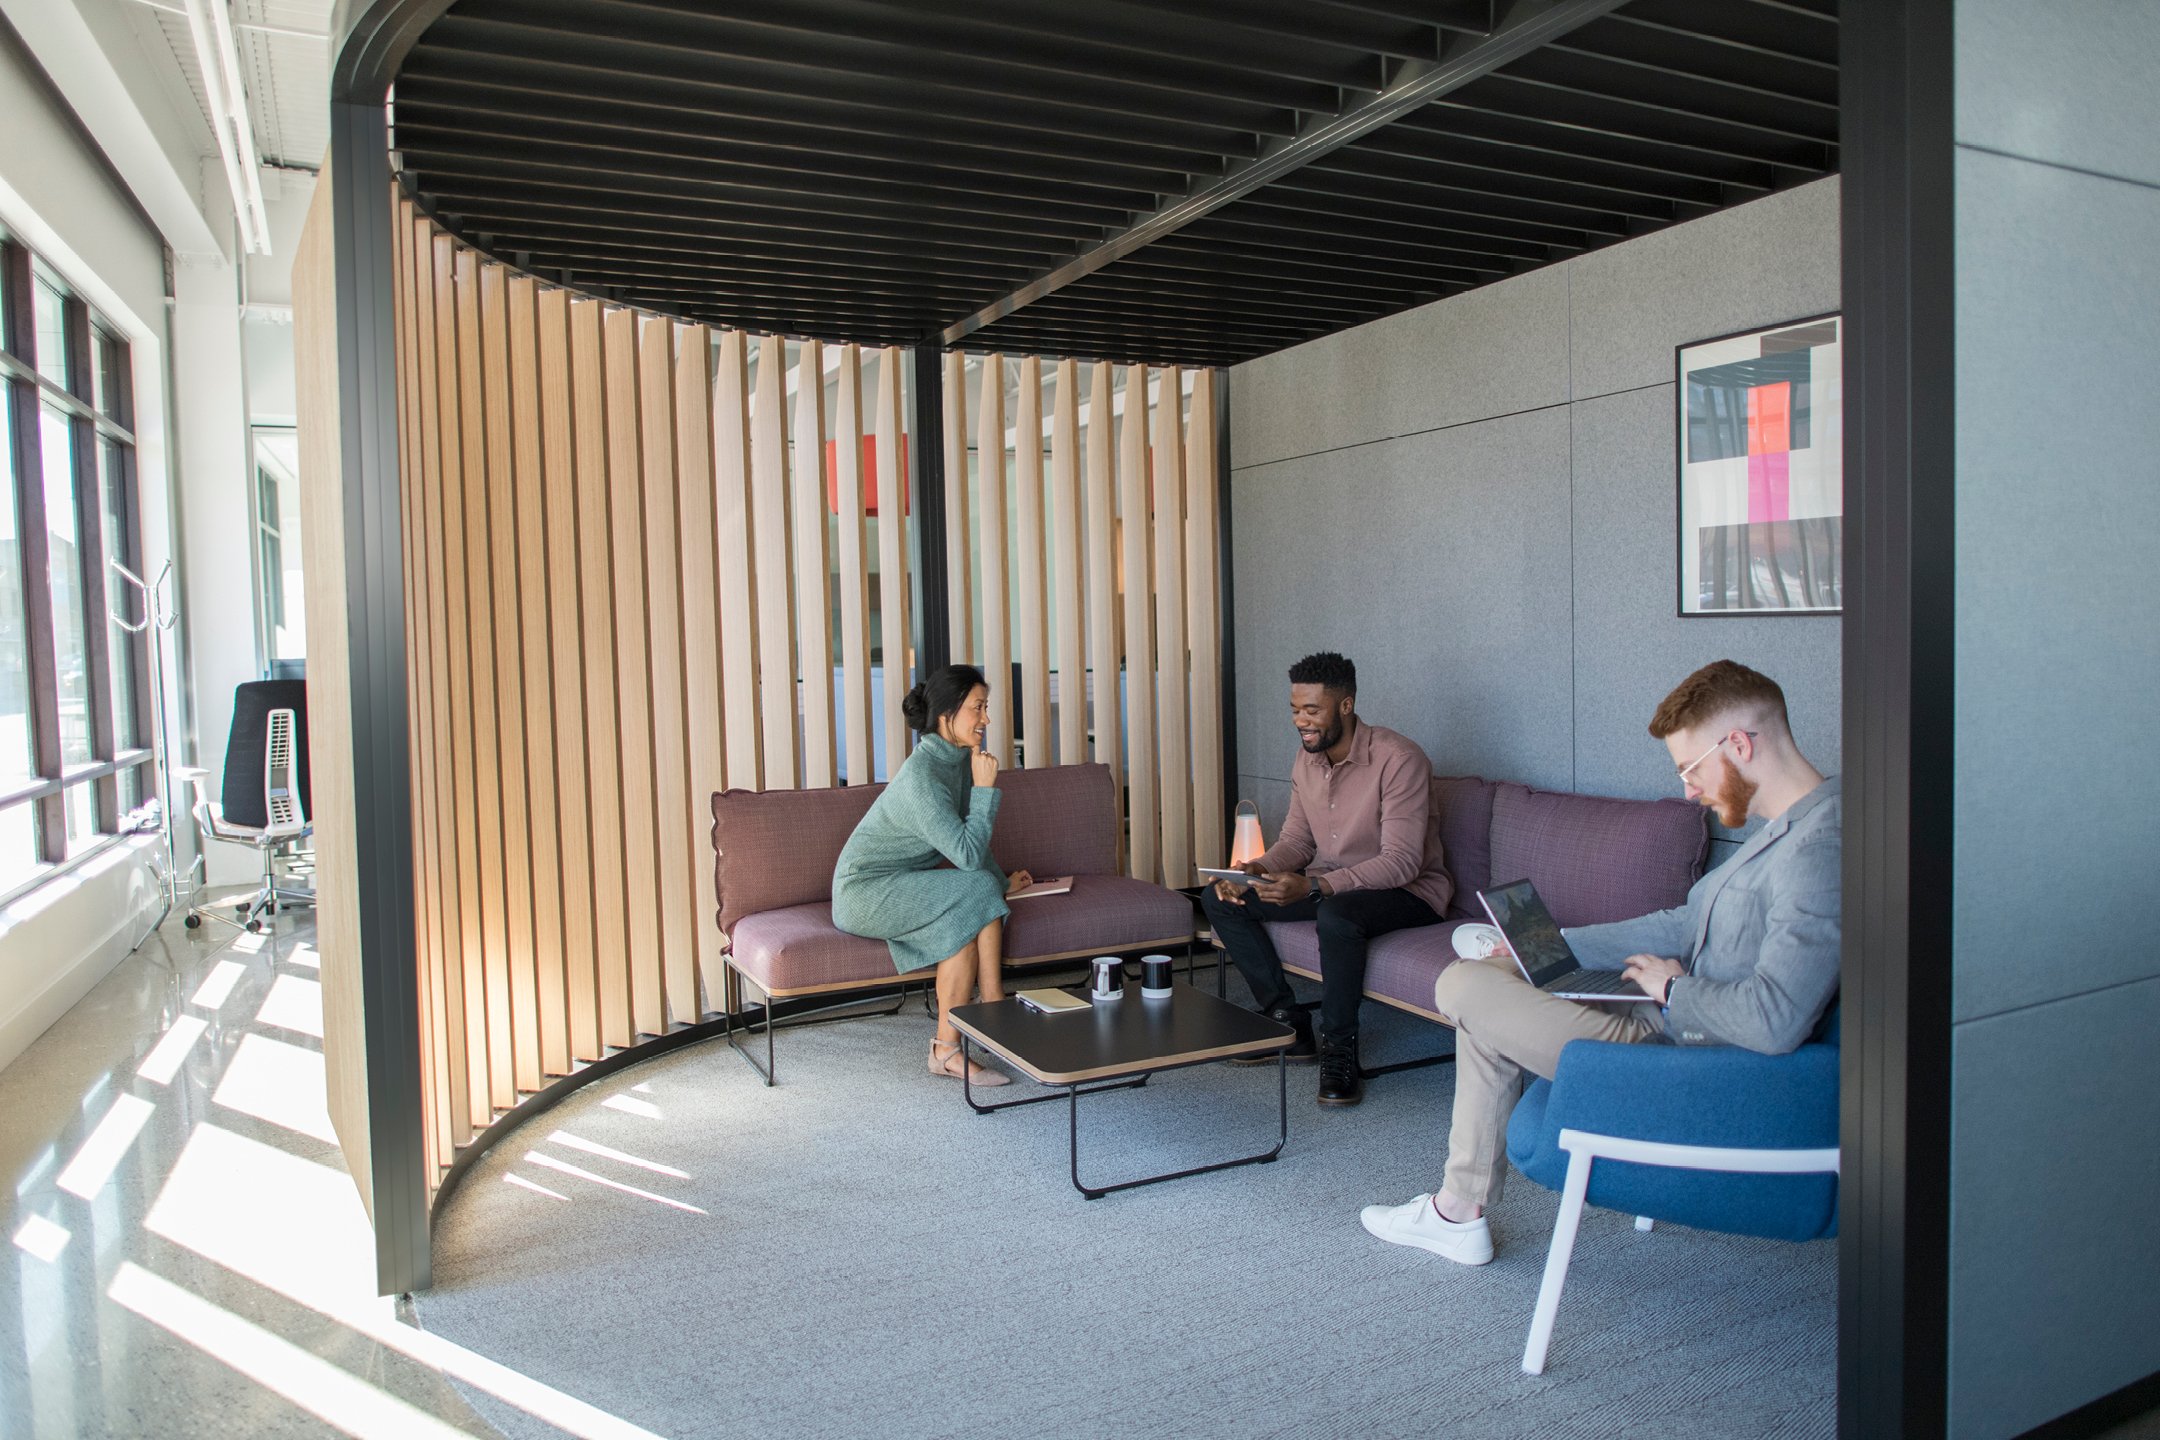 Haworth Pergola Workspace with black trim and grey walls and wood veneer slits for private collaboration room with couch and table and employees working in the office setting